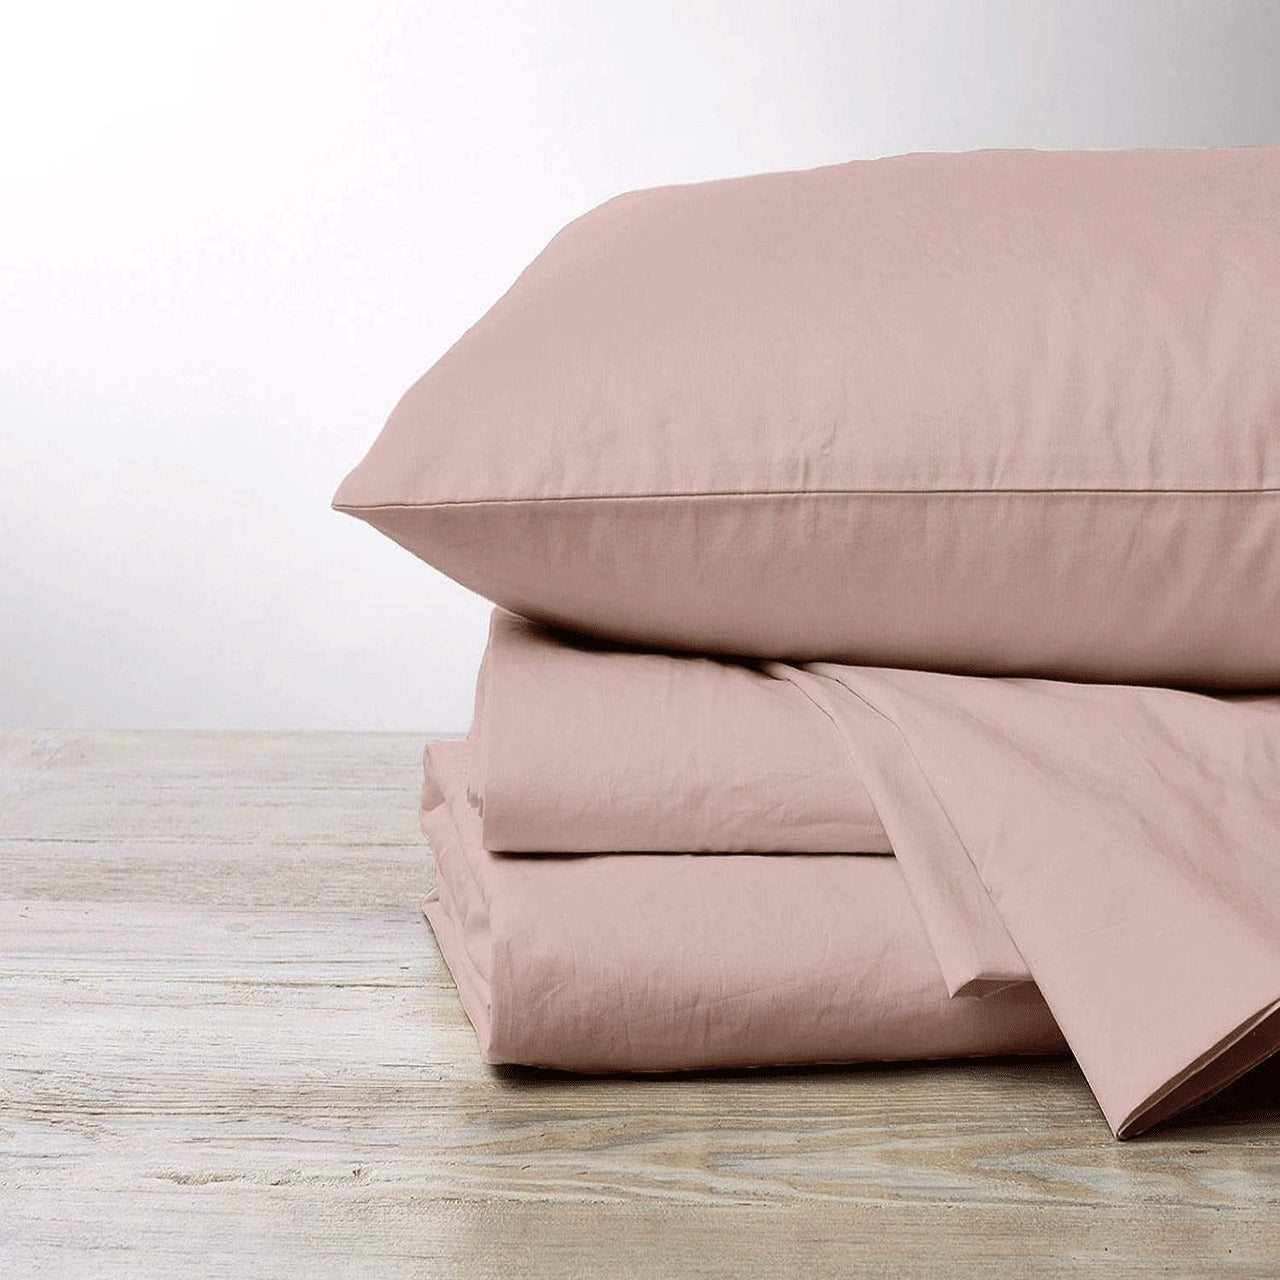 EUQIFAH Cotton Sateen Bed Sheet Set - Soft, Silky, Shiny - Luxurious Comfort Bedding - Fade & Shrink Resistant -T300-4 Pieces (Queen Size) (Iceberg) Visit the EUQIFAH Store